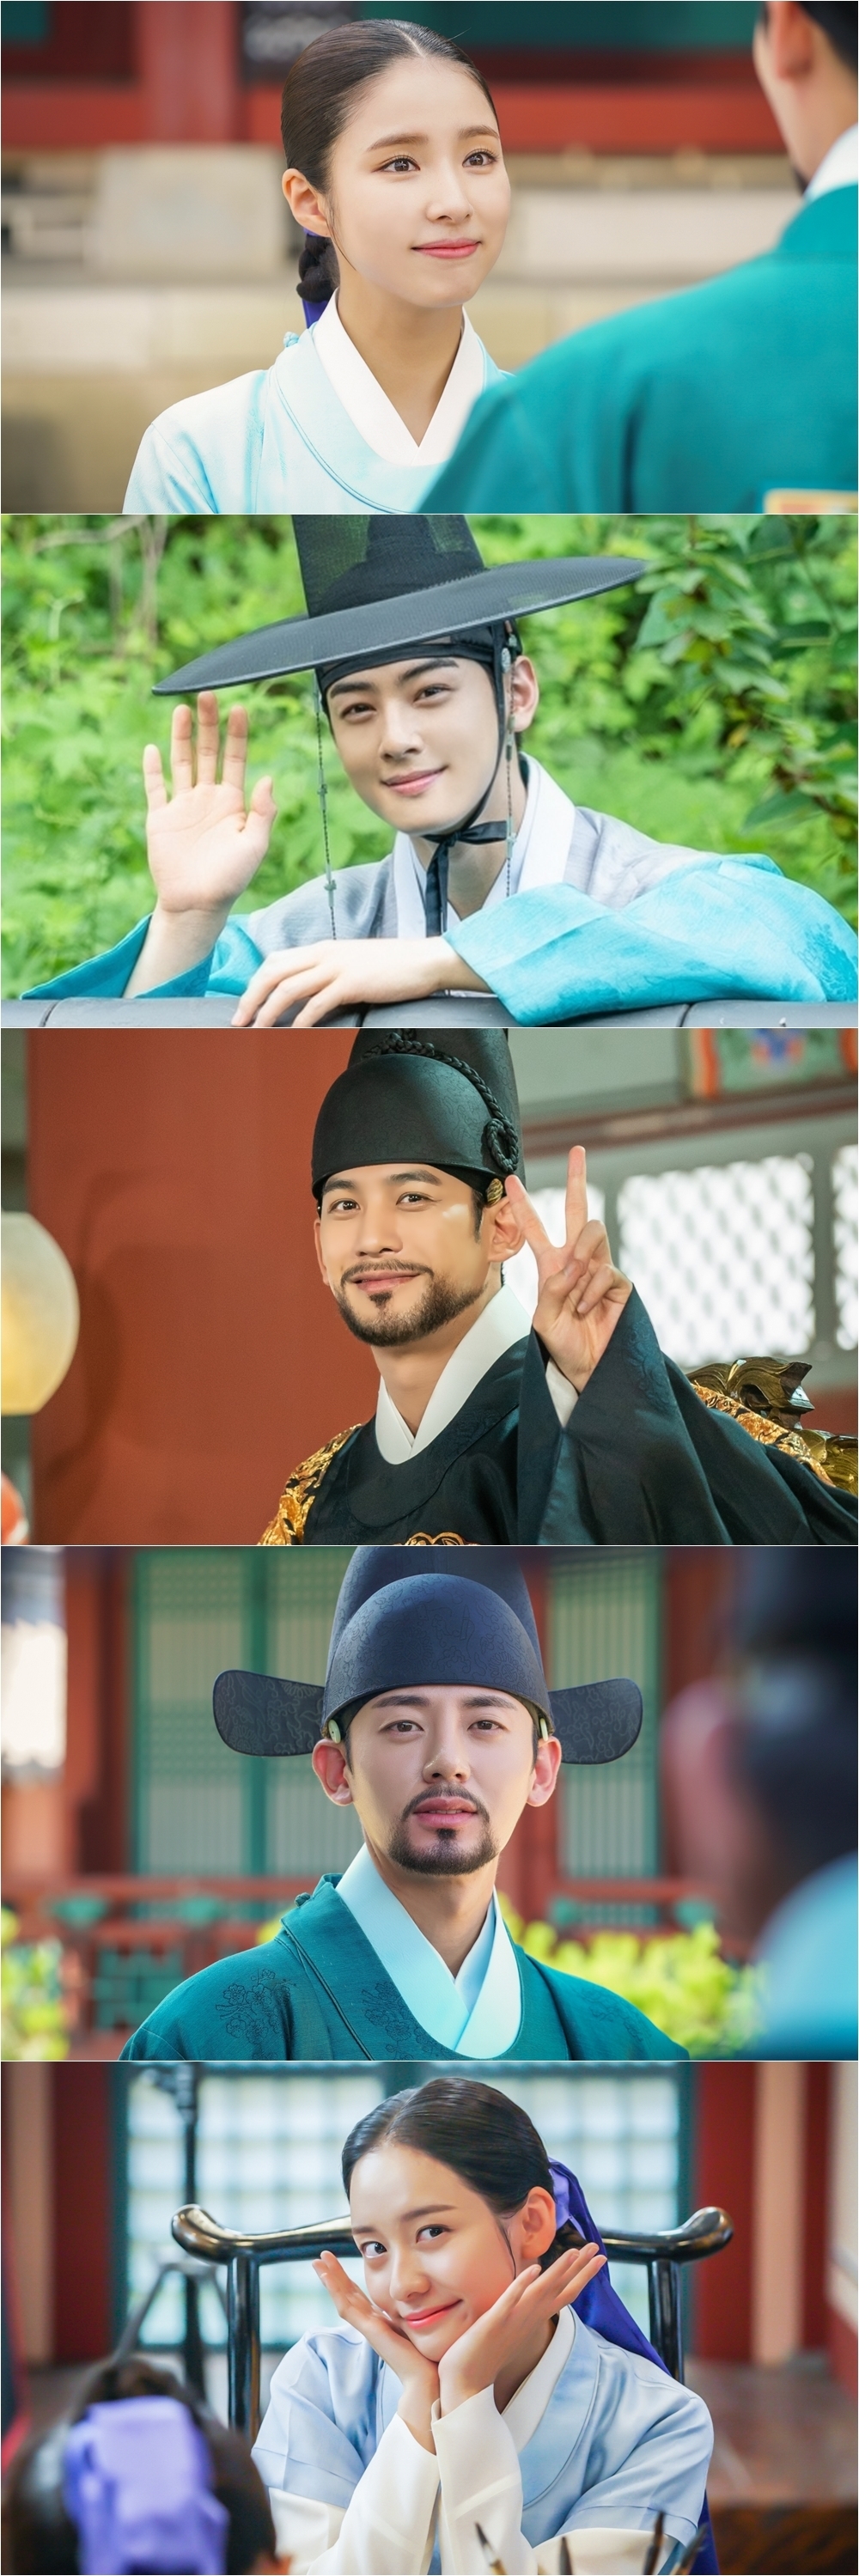 MBC drama Na Hae-ryung (played by Kim Ho-soo/directed by Kang Il-soo and Han Hyun-hee) said on the 9th, We have Absent this weeks broadcast for Chuseok.I am going to visit Kahaani, which is richer and more exciting next week, on the 18th of next week.In addition, Shin Se-kyung, Jung Eun-woo and other Absents regrets to be released with a flower smile is attracted to the public.As the Na Hae-ryung is Absent on the 11th and 12th, interest in the action of Ada Lovelace Na Hae-ryung is hot.The wind of change that she brings to and from Korea, the pink romance with Irim, and the unpredictable Kahaani 20 years ago are raising the topic every time.Among them, Na Hae-ryung is a new history of Joseon as Ada Lovelace.After returning from her childhood in the Qing Dynasty, she spurred the Wedding Bible, which was formed by the forced family, and took the path of Ada Lovelace.Na Hae-ryung, who showed the spirit that the tense given by Crown Prince Lee Jin (played by Park Ki-woong) was wrong in the Ada Lovelace star poem.As Kwon Ji (now an intern), she began her life as a non-green palace, receiving the mother-in-law of her seniors and the despise of her masters.Nevertheless, Na Hae-ryung found absurdity that is happening in Gwangheungchang and the corruption of personnel in Ijo, and gave catharsis to viewers in a way that tried to correct it and was responsible.In particular, the scene where she received an apology by making a conversation with Lee Tae (Kim Min-sang) of Hamyoung-gun, Hyunwang, and expanded the position of the officers was an unprecedented female character who reversed the history of Joseon.The romance Na Hae-ryung presents with Lee Rim is also a hot topic.The two men, who met for the first time in the bookstore, grew up together with each others pain and became pink fruit as a result.Above all, Irim met Na Hae-ryung and realized himself as a true prince by personally experiencing the outside world of the Green Sea Party, where he was trapped and trapped.Unlike the early days when he was nervous and nervous about Ham Young-guns call, he is being supported by viewers by revealing his presence gradually, such as pinching Ham Young-guns fault and saying that he will be responsible for his actions.Lee enjoyed the happiness of Confessions and the love of Na Hae-ryung, who became the driving force of his growth.Happiness also fell short of Ham Young-guns name to raise Wedding Bible for a while, and Na Hae-ryung turned from him.She said that she could throw away everything, and she was curious about how their romance would flow.Lee Jin is trying alone to spread politics for the people between Ham Young-gun and Min-ik-pyeong (Choi Deok-moon) of the left-wing government.He has shown deep friendship with his infinite affection for his brother Irim.Among them, as Lee Rim, who is mentioned as the enemy of the former owner Lee Kyeom (played by Yoon Jong-hoon), who disappeared from the past 20 years ago, is drawn at the end of the last broadcast, there is growing interest in how Lee Jin will react to the past 20 years ago, when Lee Jin is gradually being revealed.As Na Hae-ryung is revealed to be the daughter of Seo Moon-jik (Lee Seung-hyo), the head of Seoraewon, there is a growing interest in how the fate of those who have not known for 20 years will flow and the development.Meanwhile, Na Hae-ryung 33rd and 34th will be broadcasted at 8:55 pm on the 18th due to the Absent of Chuseok holidays.